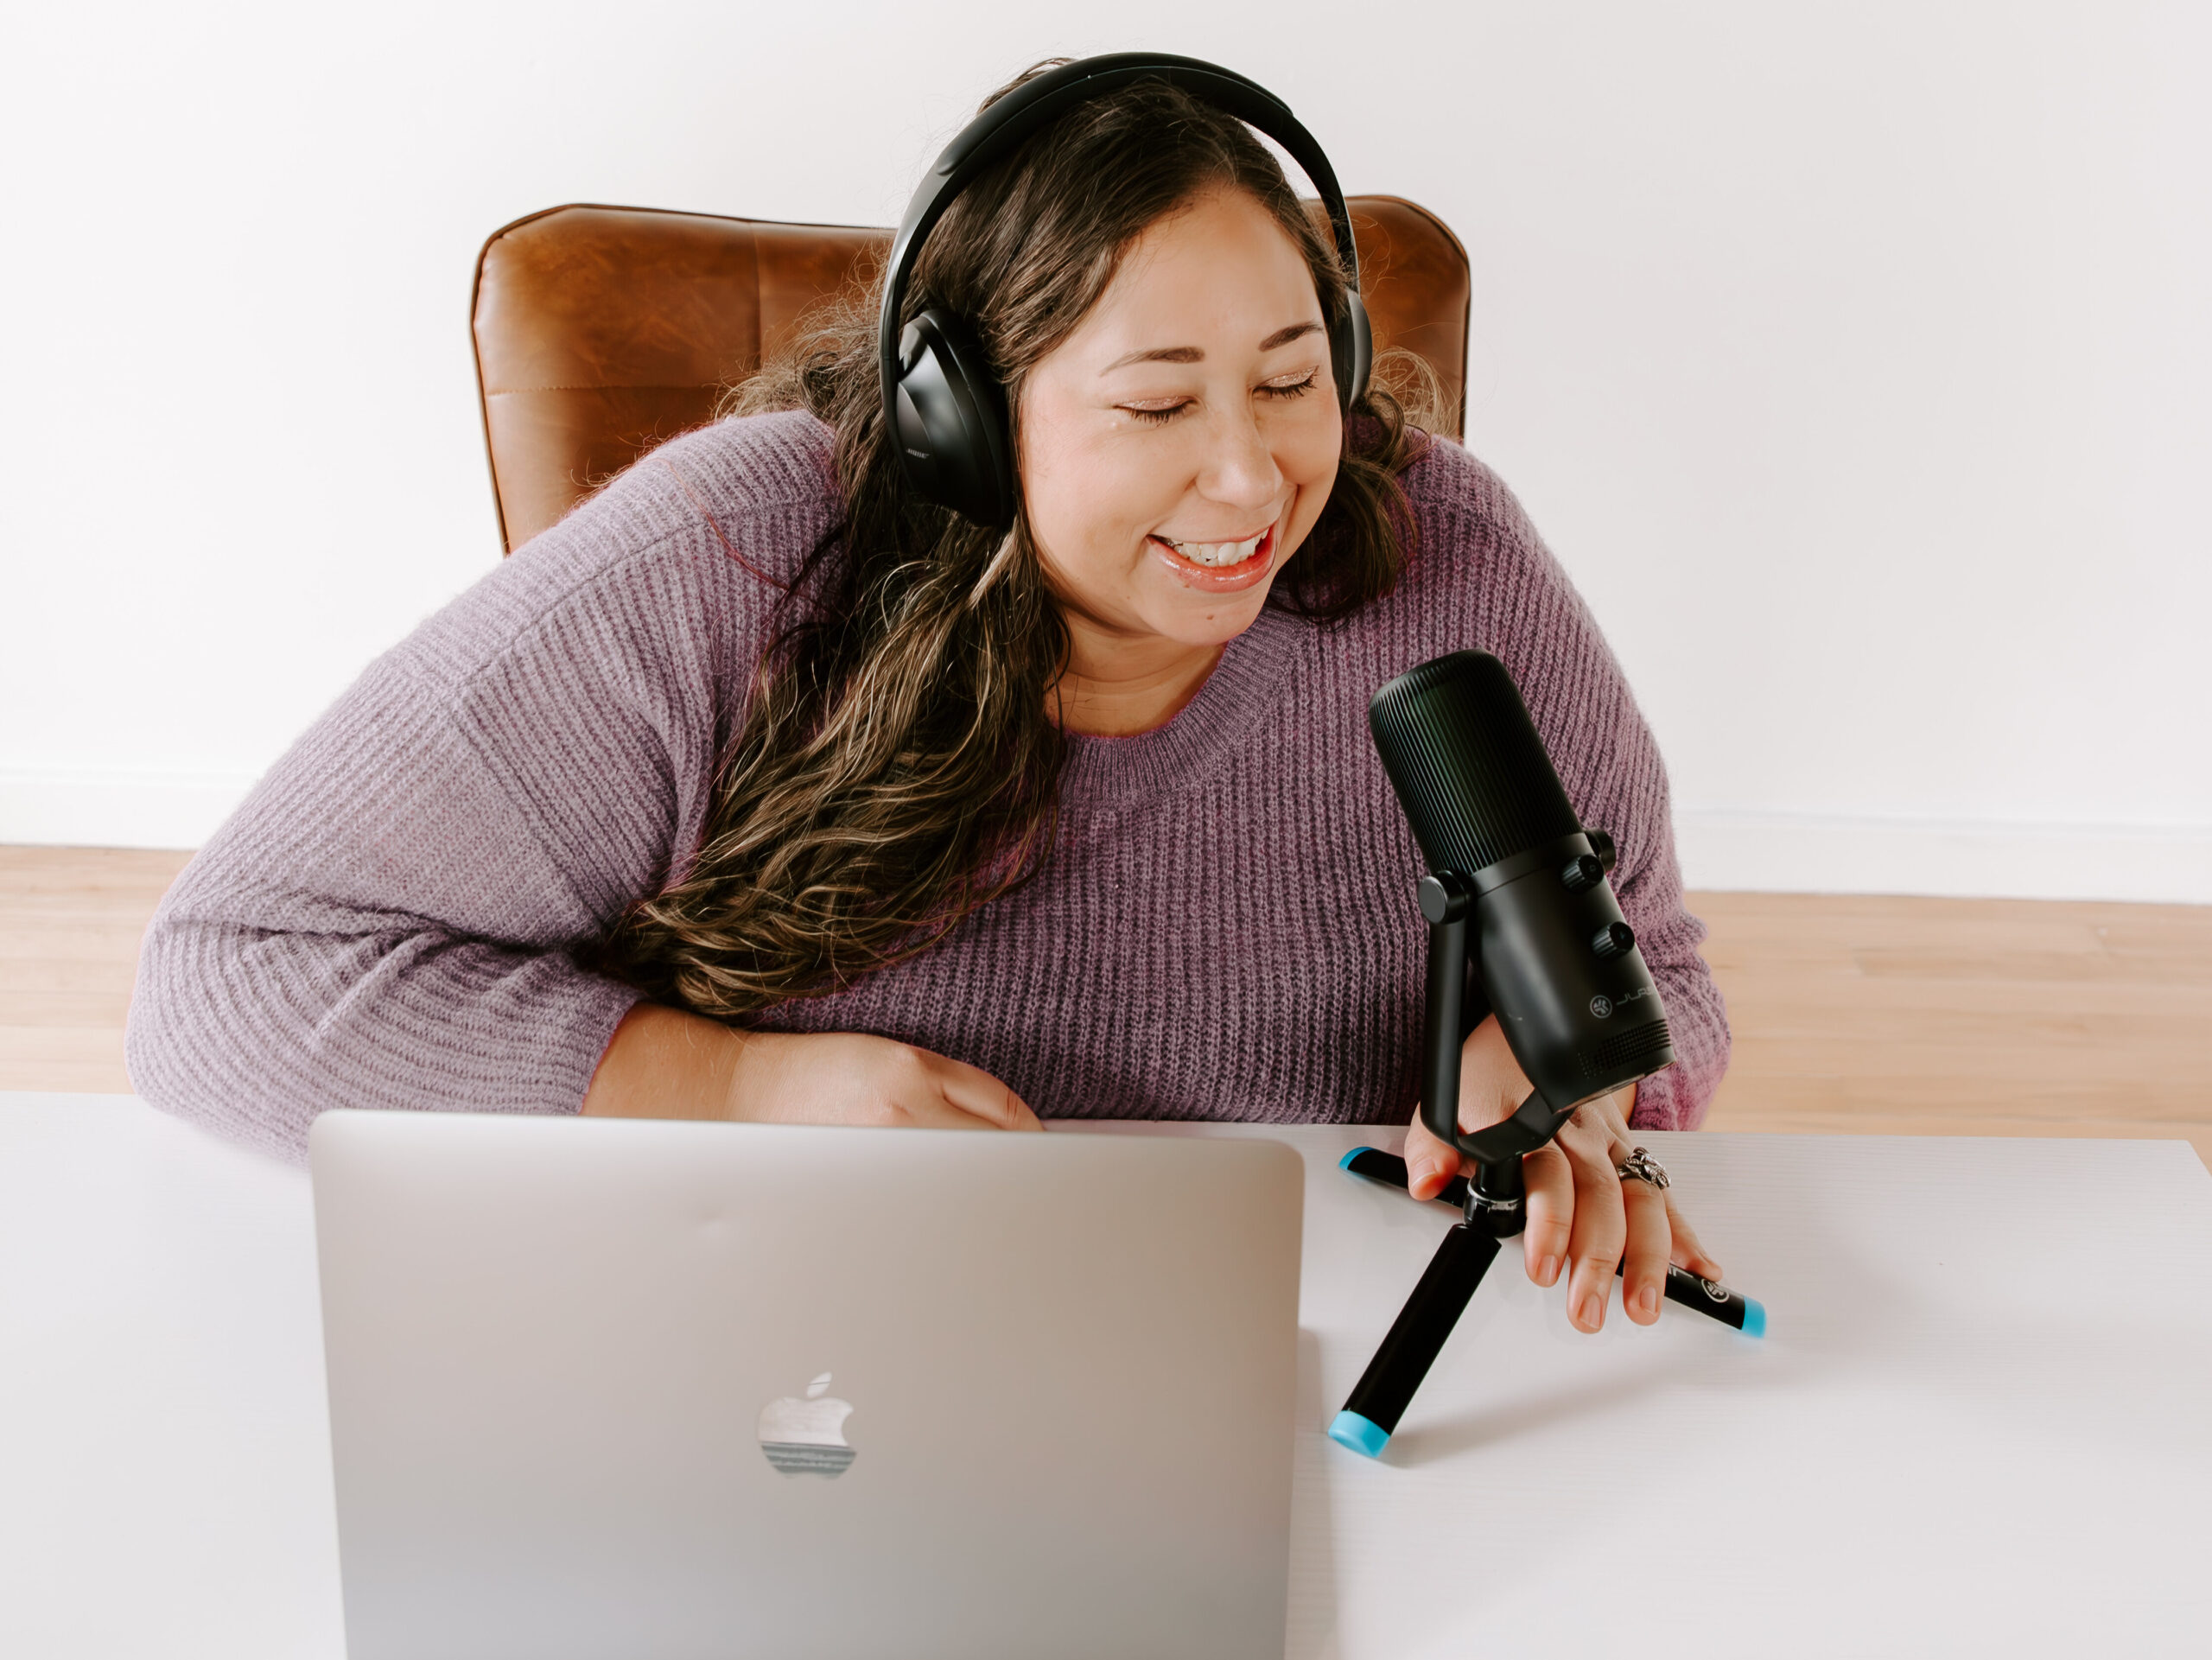 How to Find Time to Record Podcast Episodes as a Mom